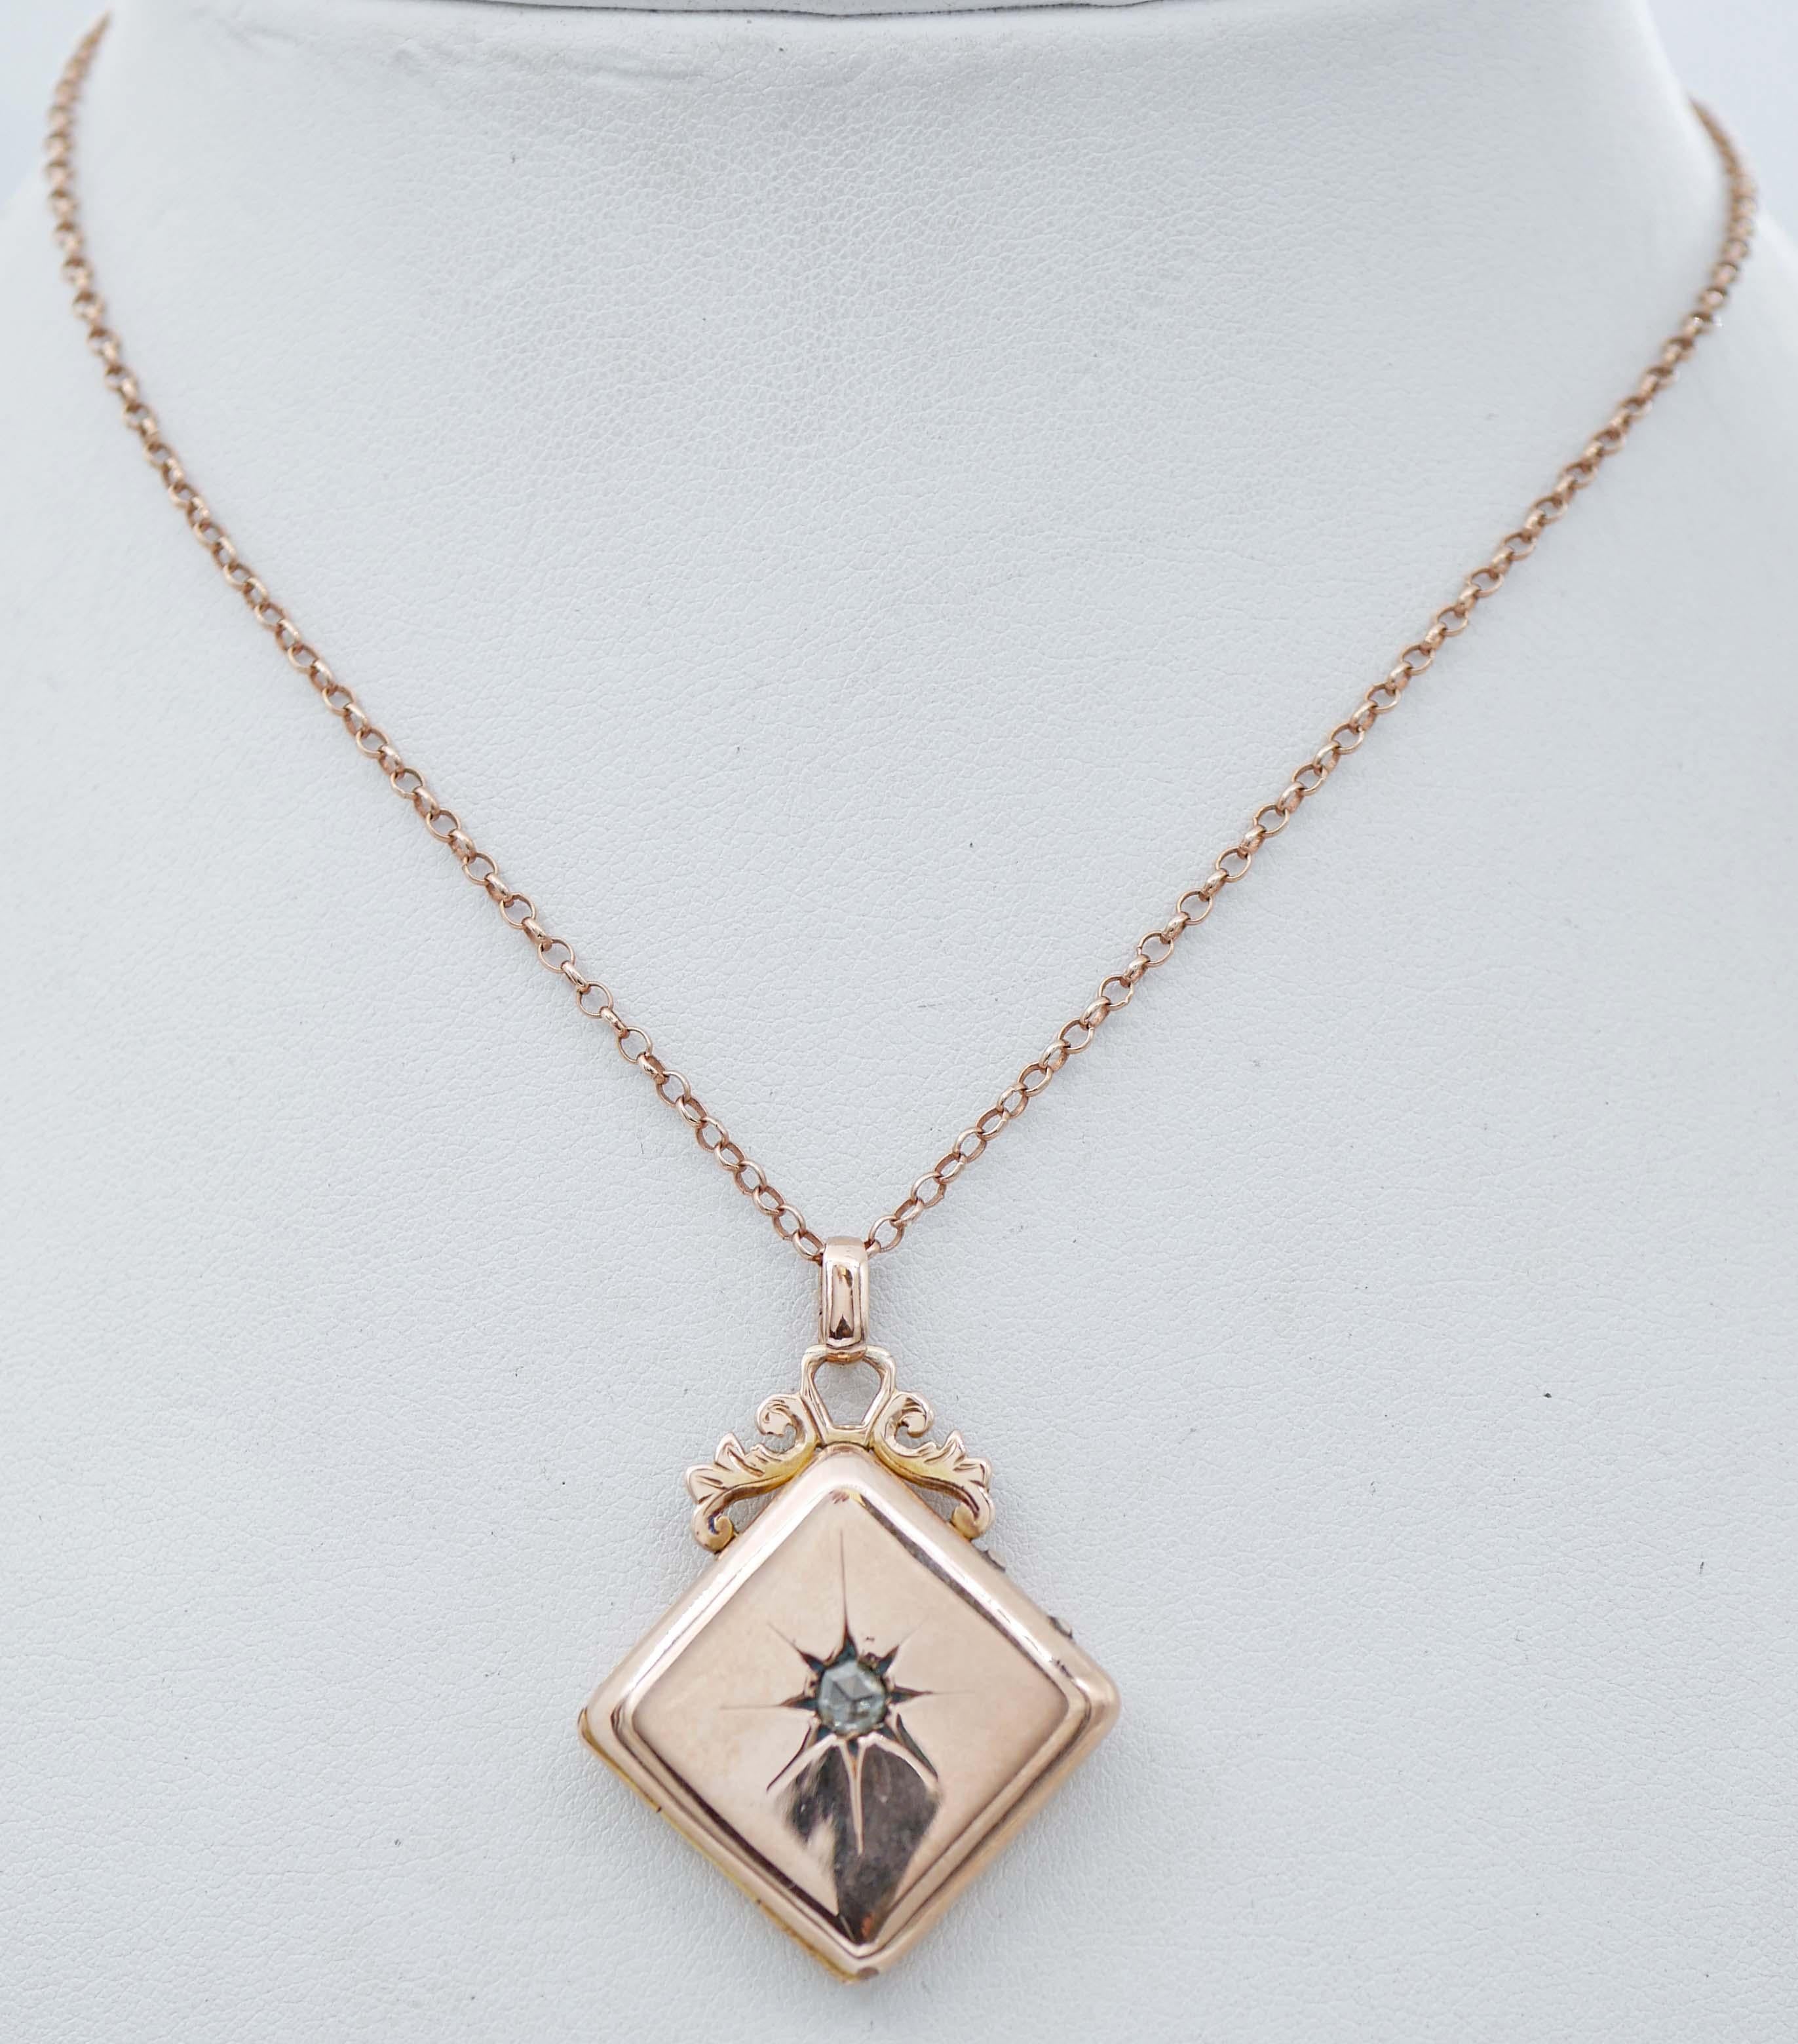 SHIPPING POLICY: 
No additional costs will be added to this order. 
Shipping costs will be totally covered by the seller (customs duties included).

Amazing retrò pendant in 9 kt rose gold structure mounted with a diamond.
This pendant was totally